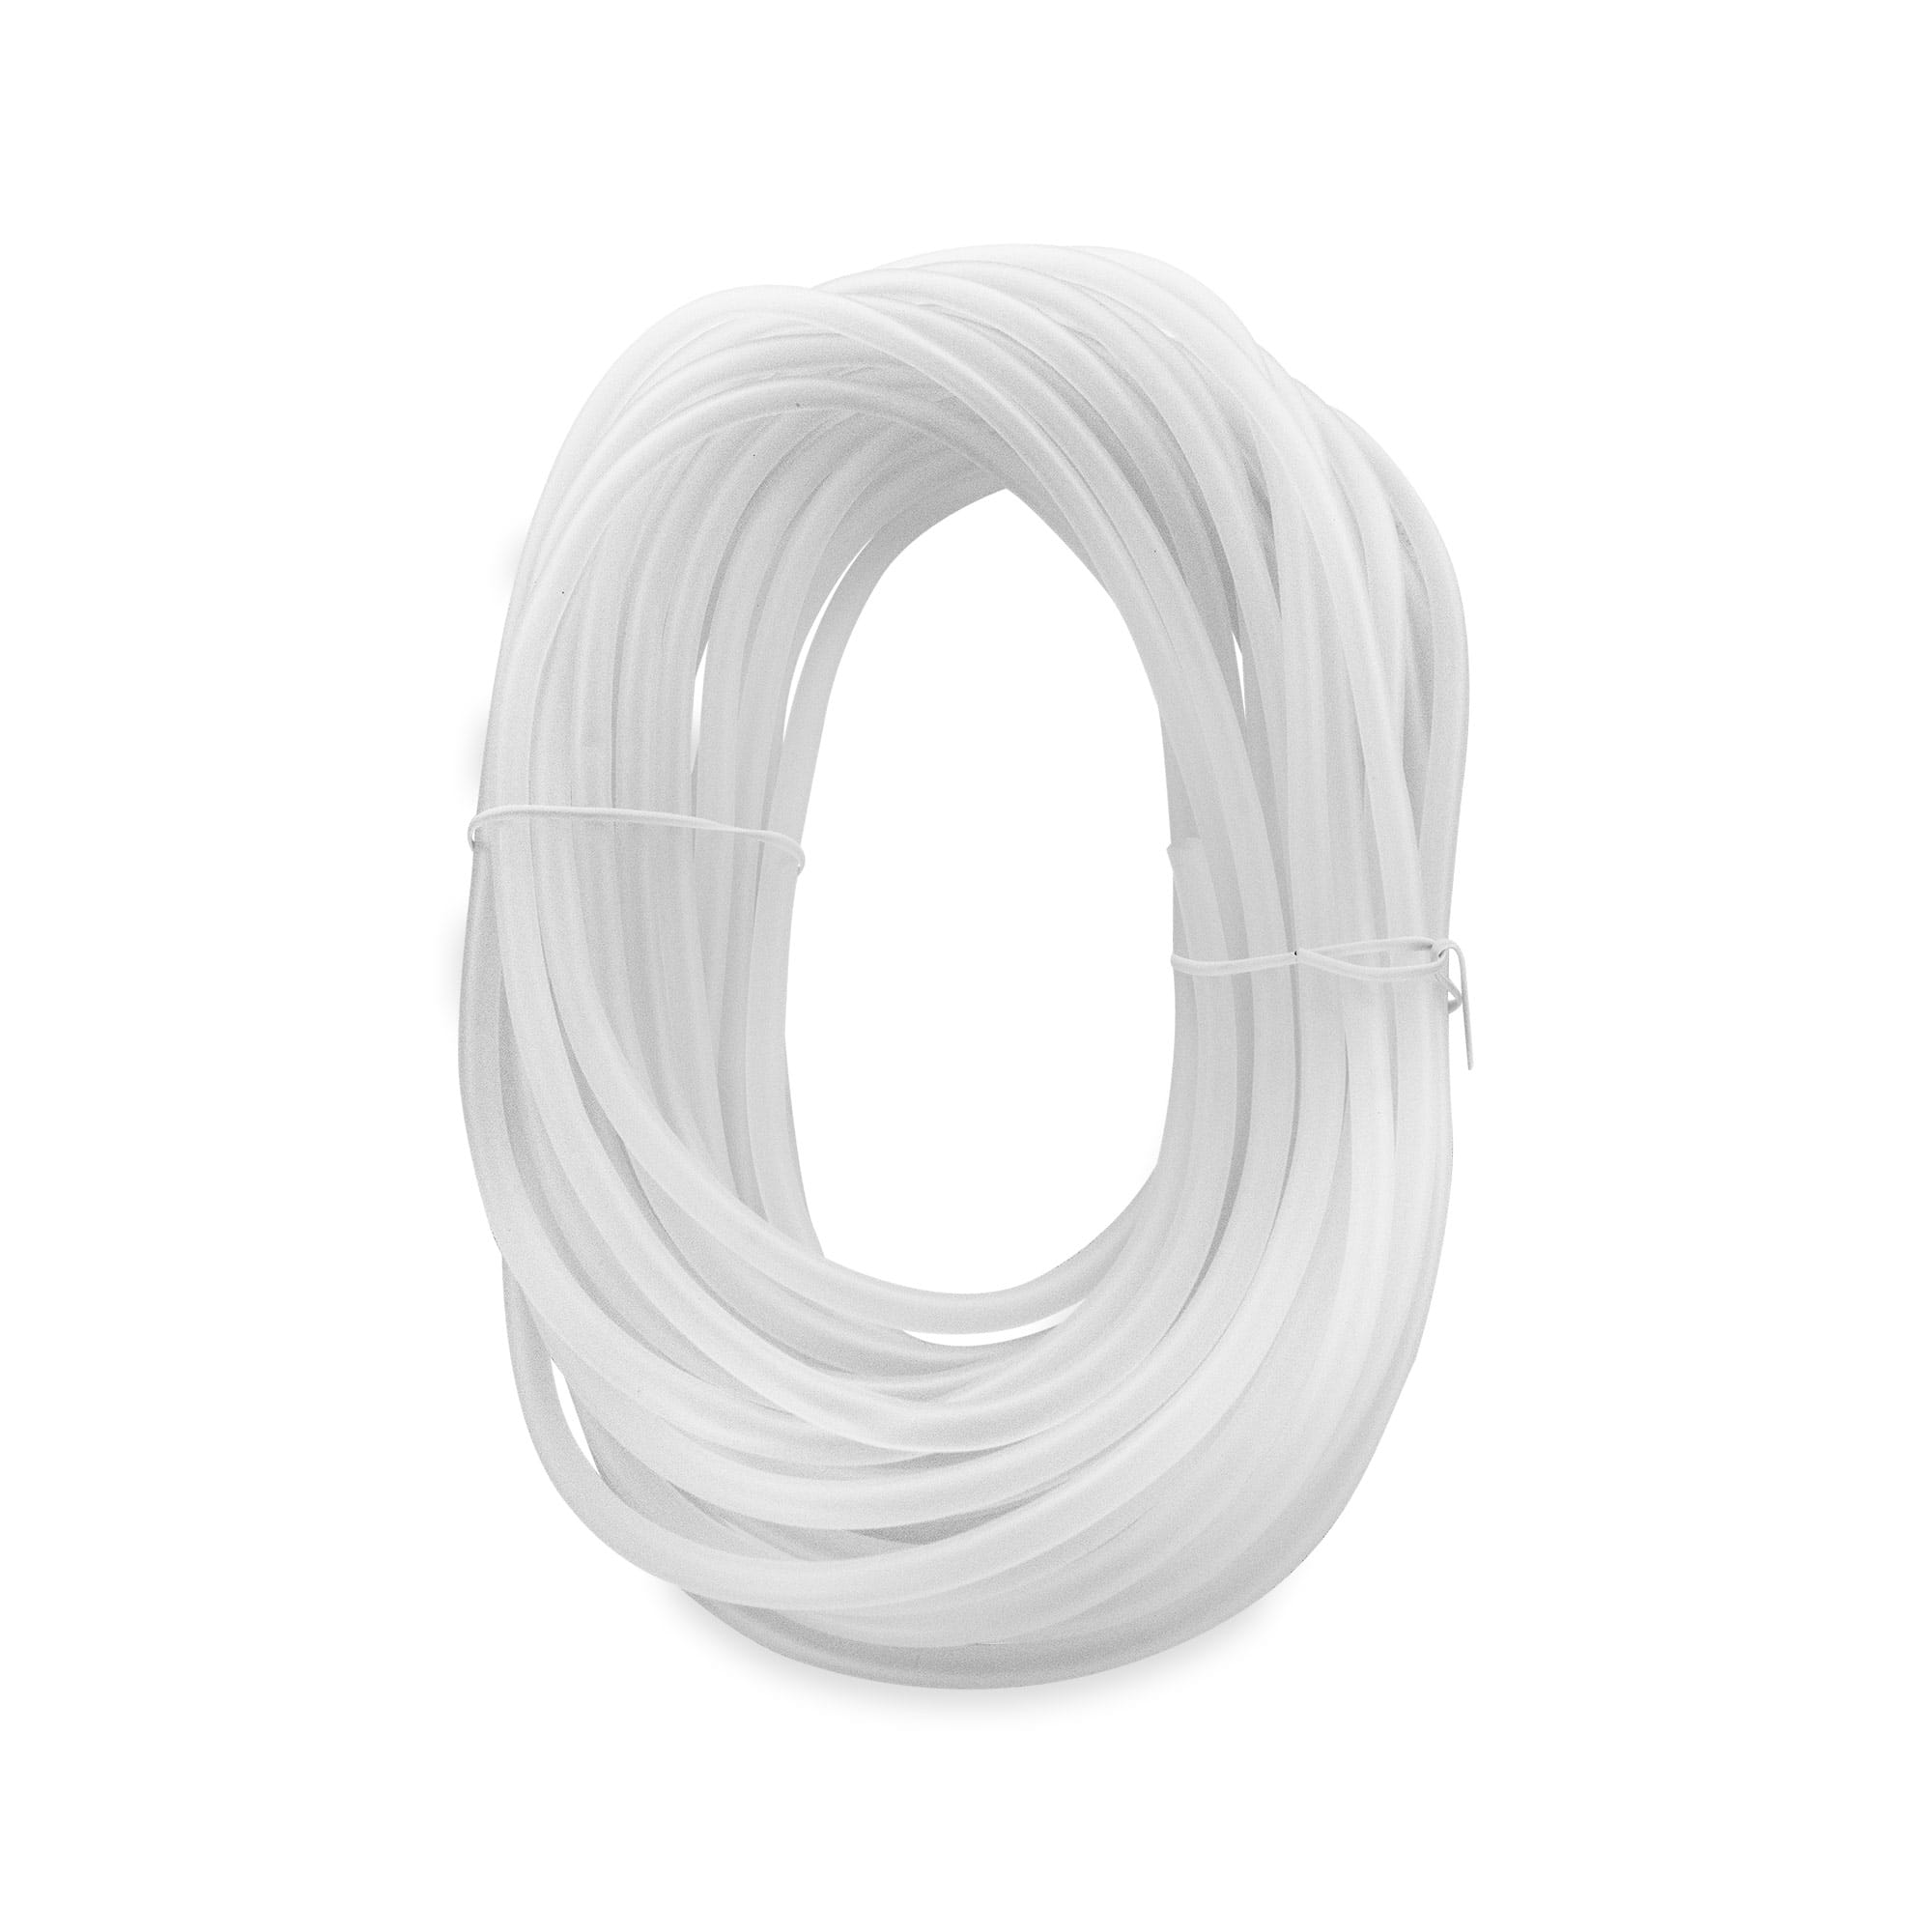 AgroMax Clear Vinyl Tubing .25 Inch - 50 Foot